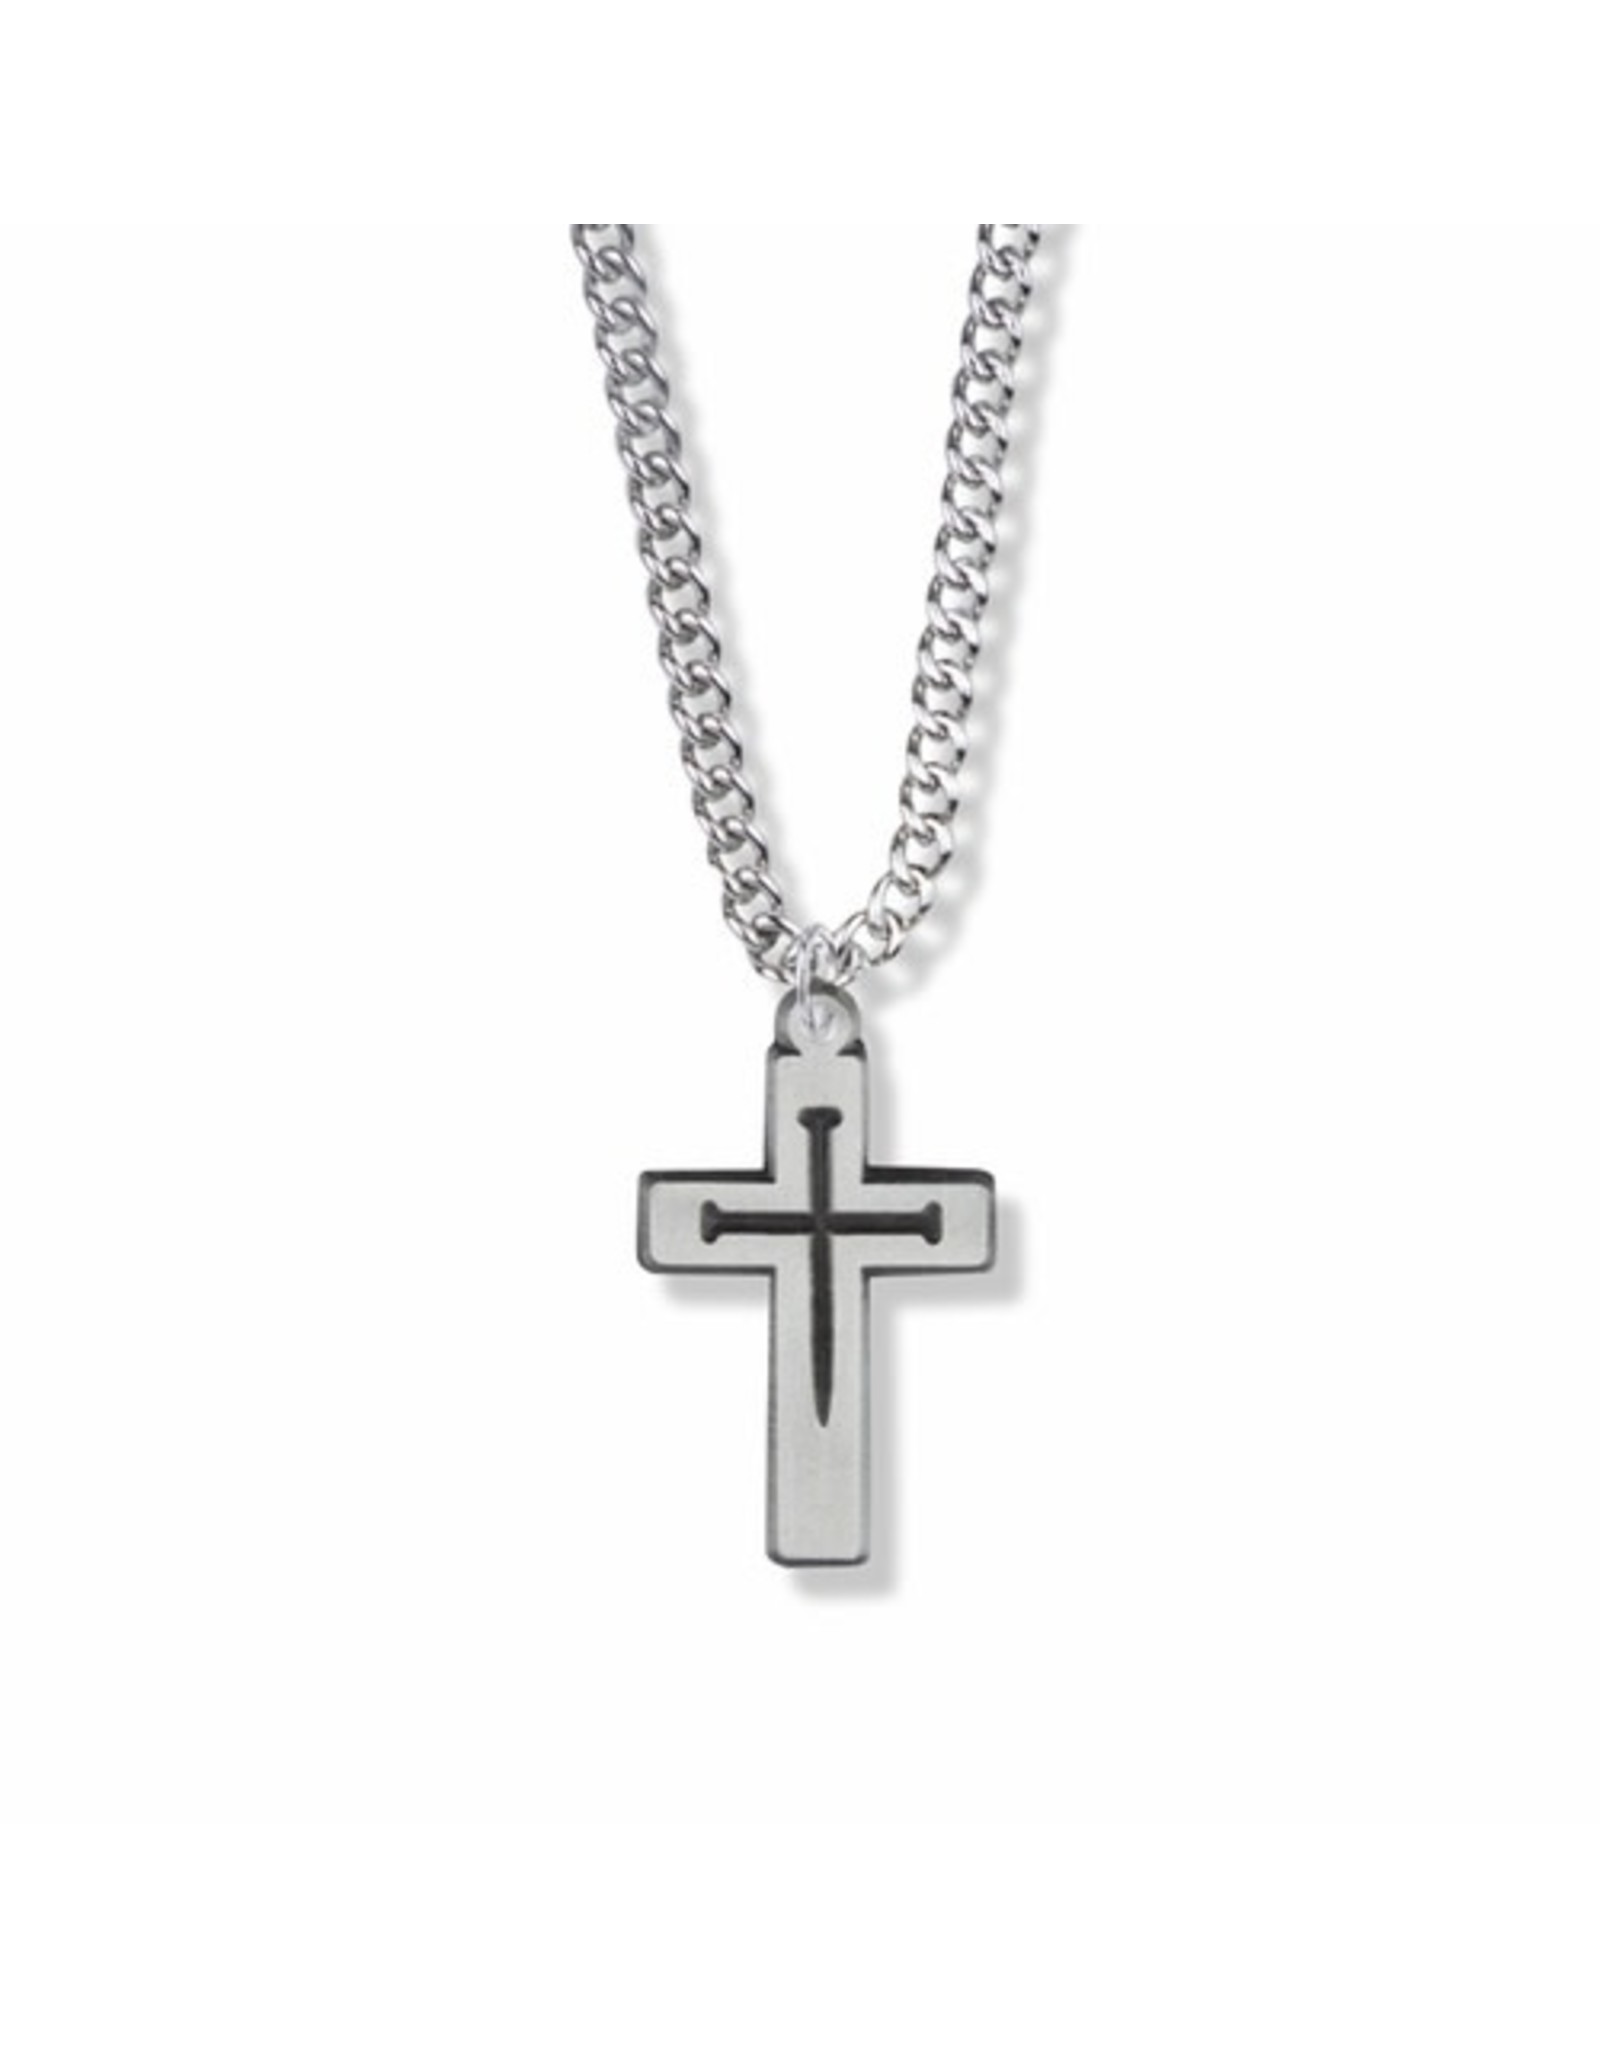 Pewter Cross with Nails Necklace on 20" Chain